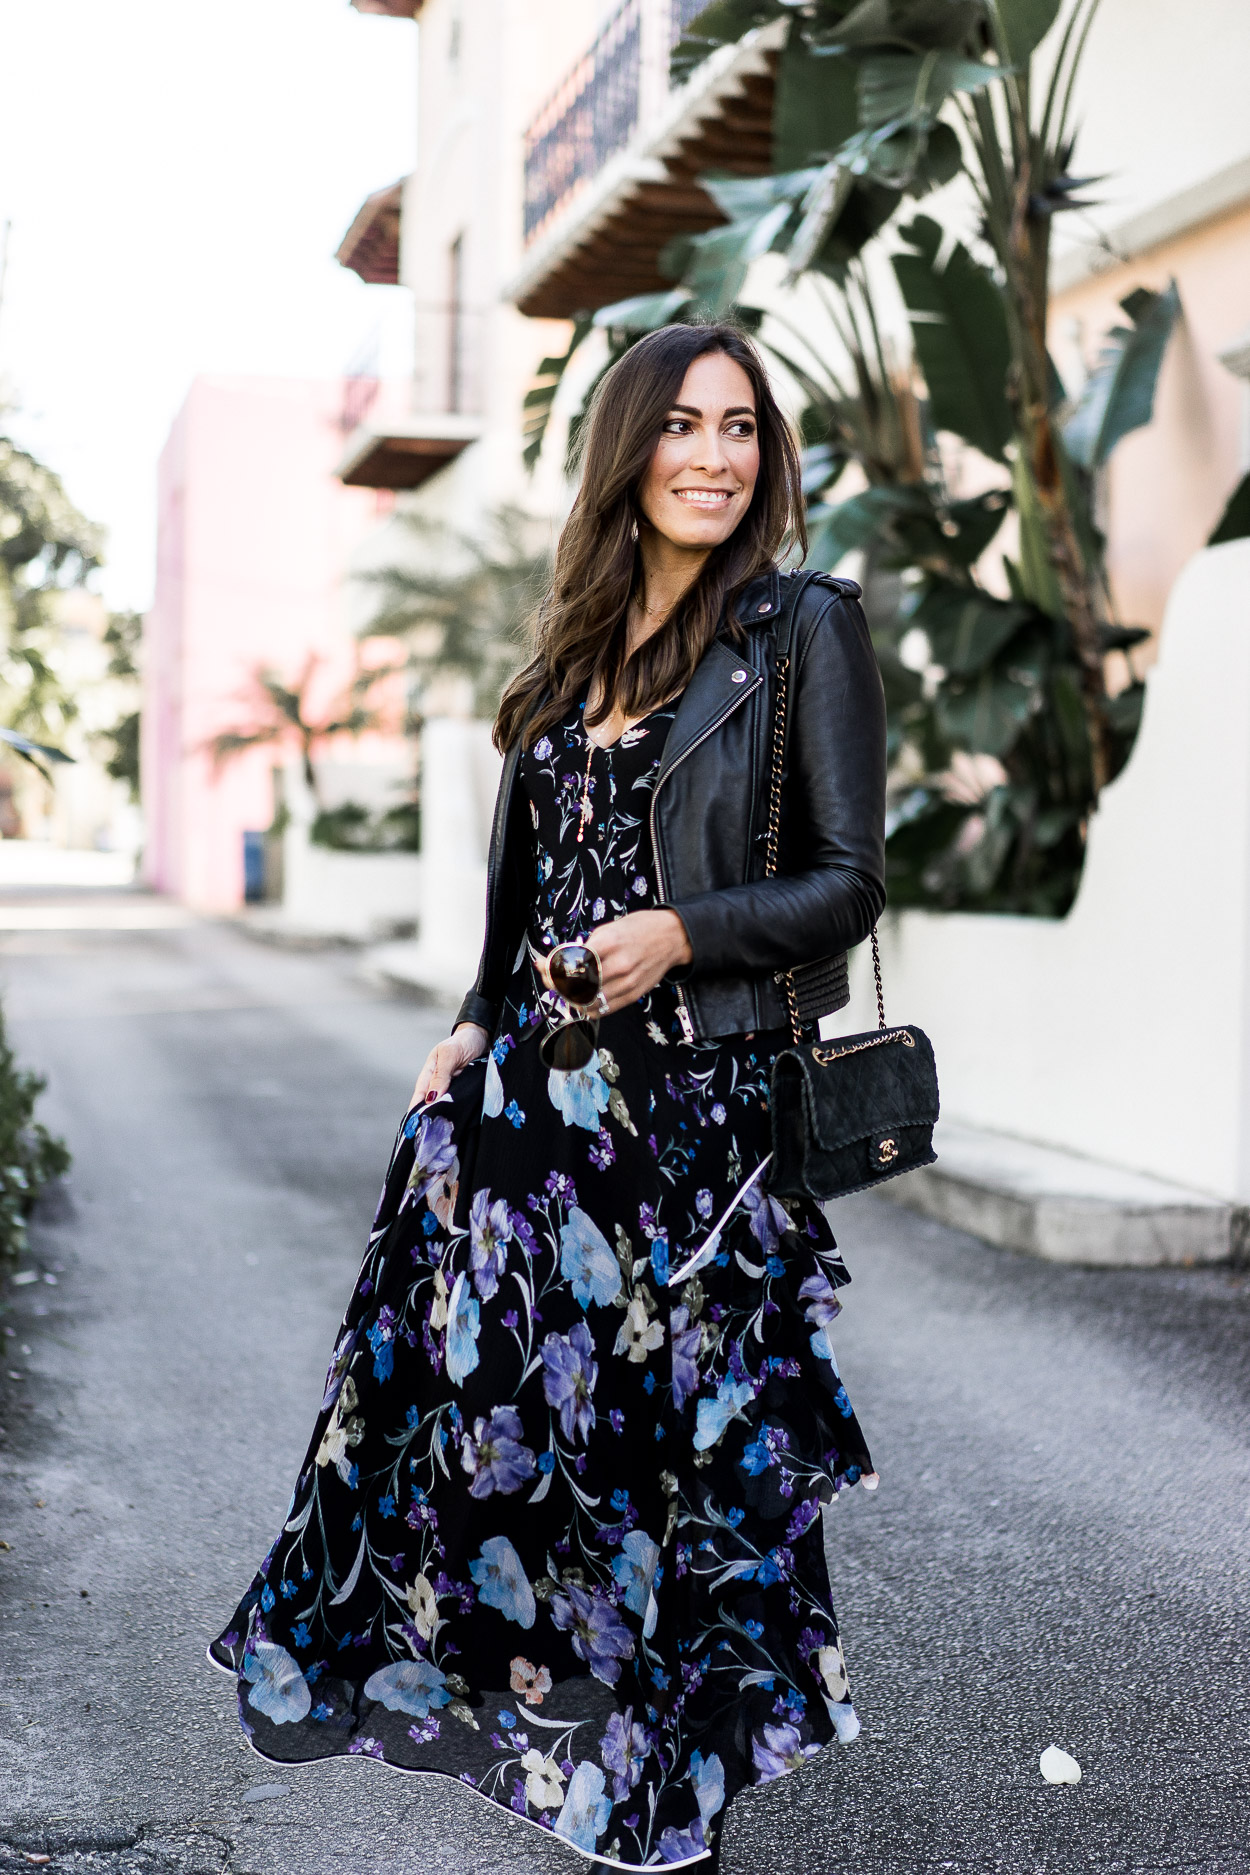 Easy brunch outfits include maxi dresses and leather jackets a la fashion blogger A Glam Lifetsyle